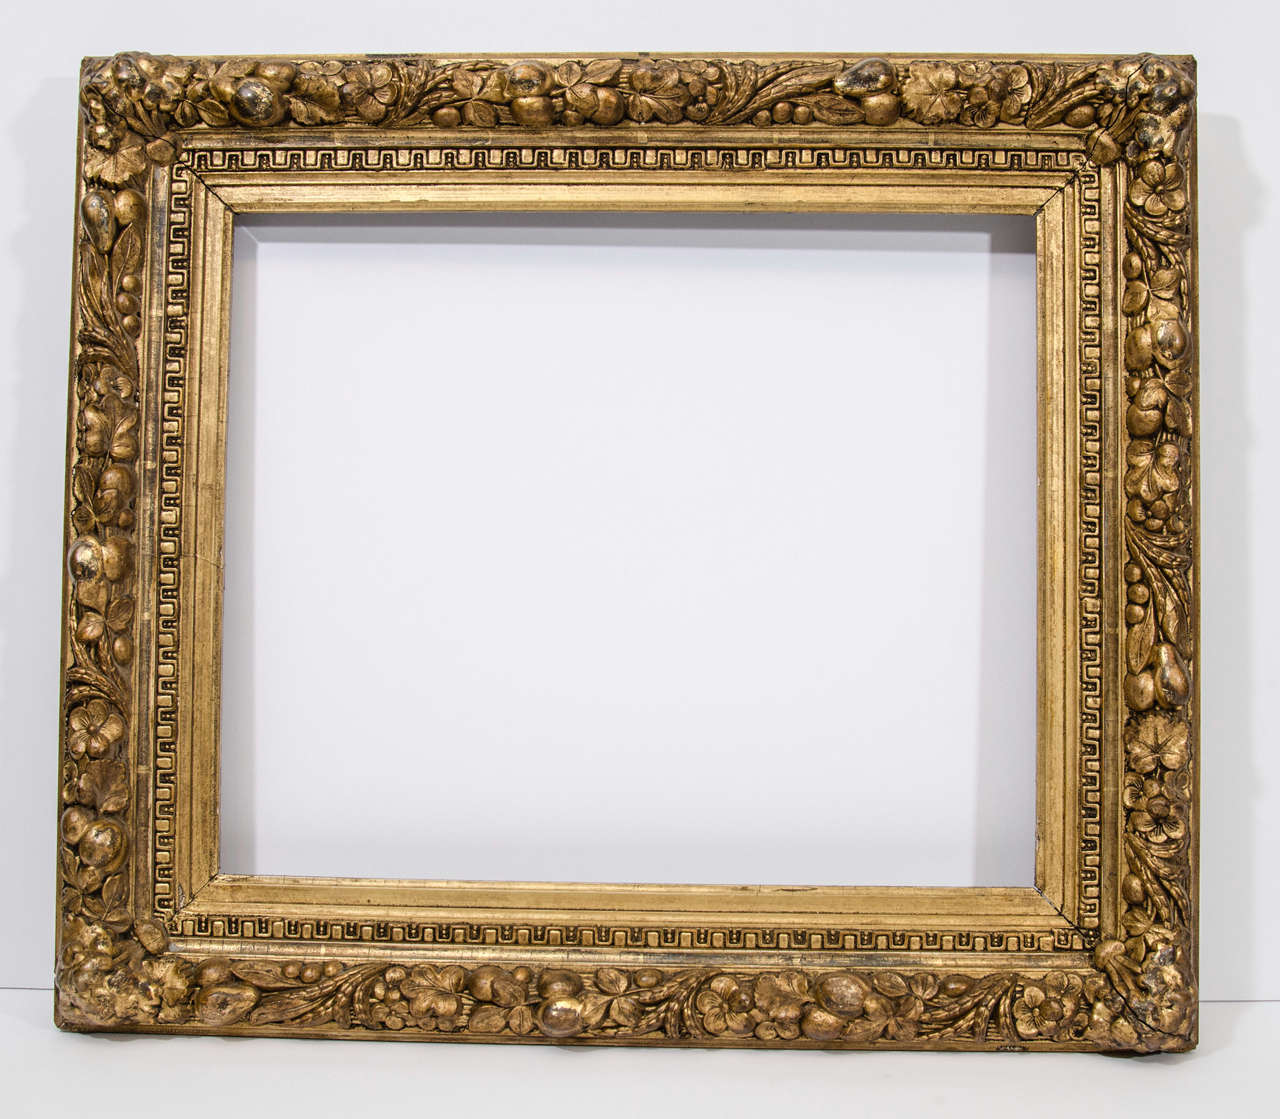 Gold leaf frame with high relief composition ornament of fruit and flowers

Exterior dimensions: 23 1/2 x 20 1/2 inches
Rabbet dimensions: 17 3/4 x 14 3/4 inches
Moulding width: 3 1/4 inches